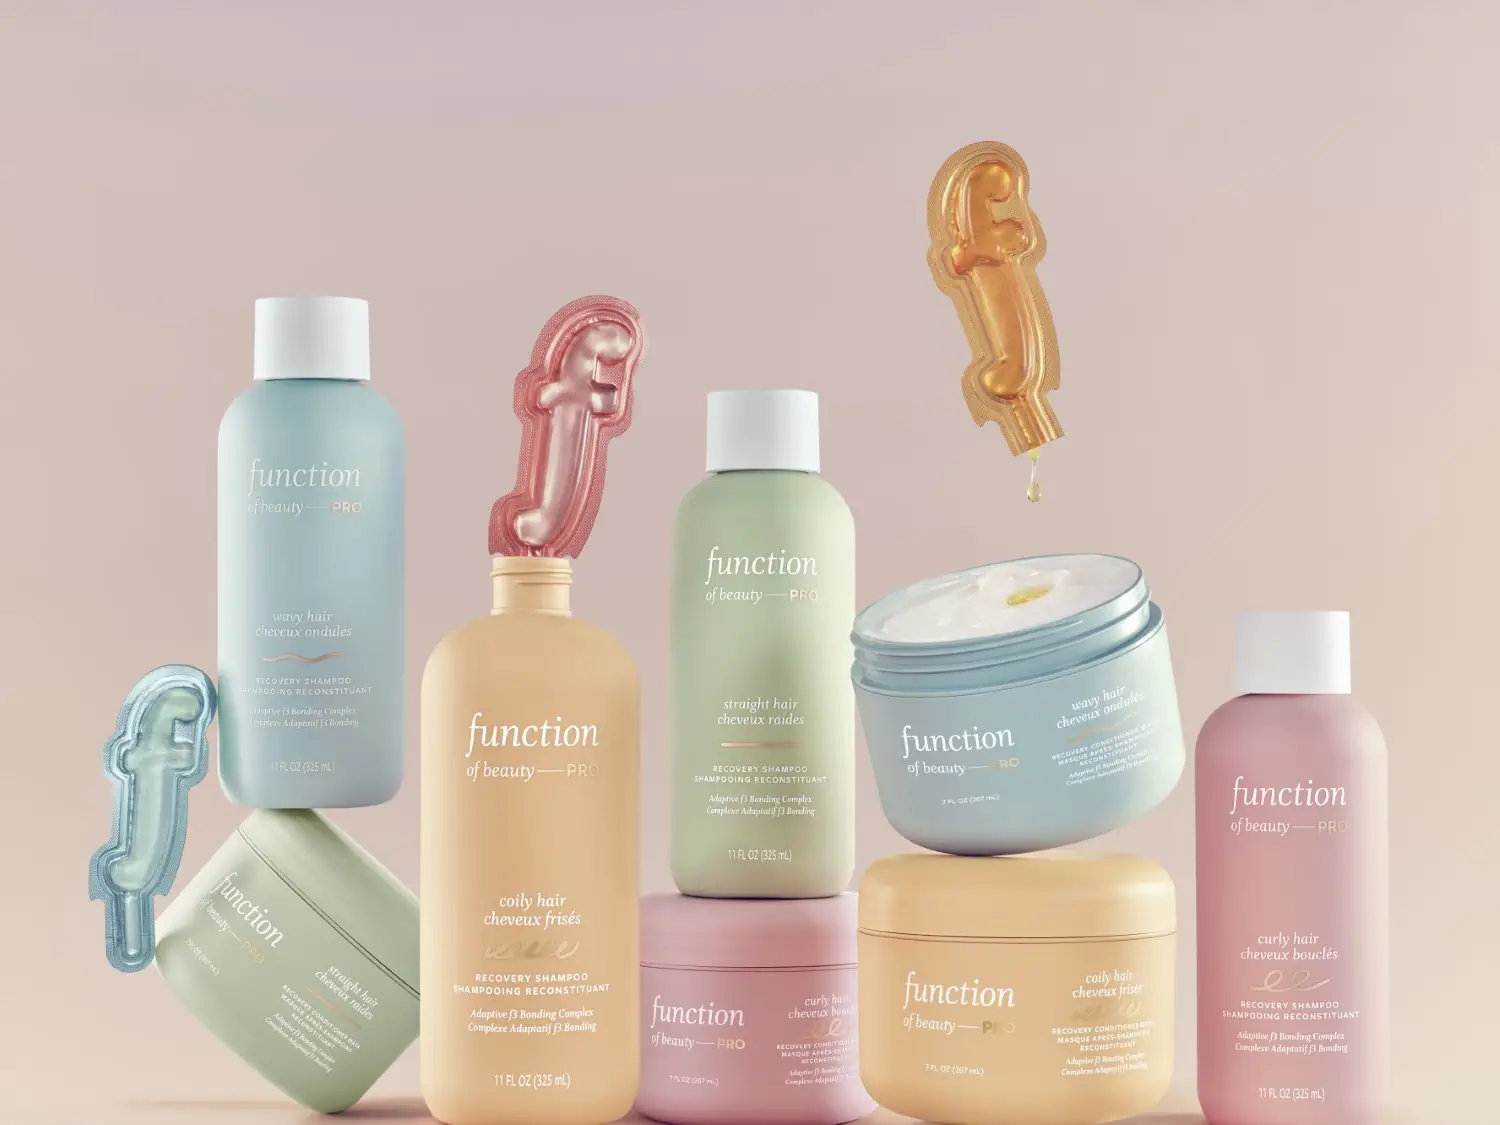 Sephora and Function of Beauty debut revolutionary hair care line